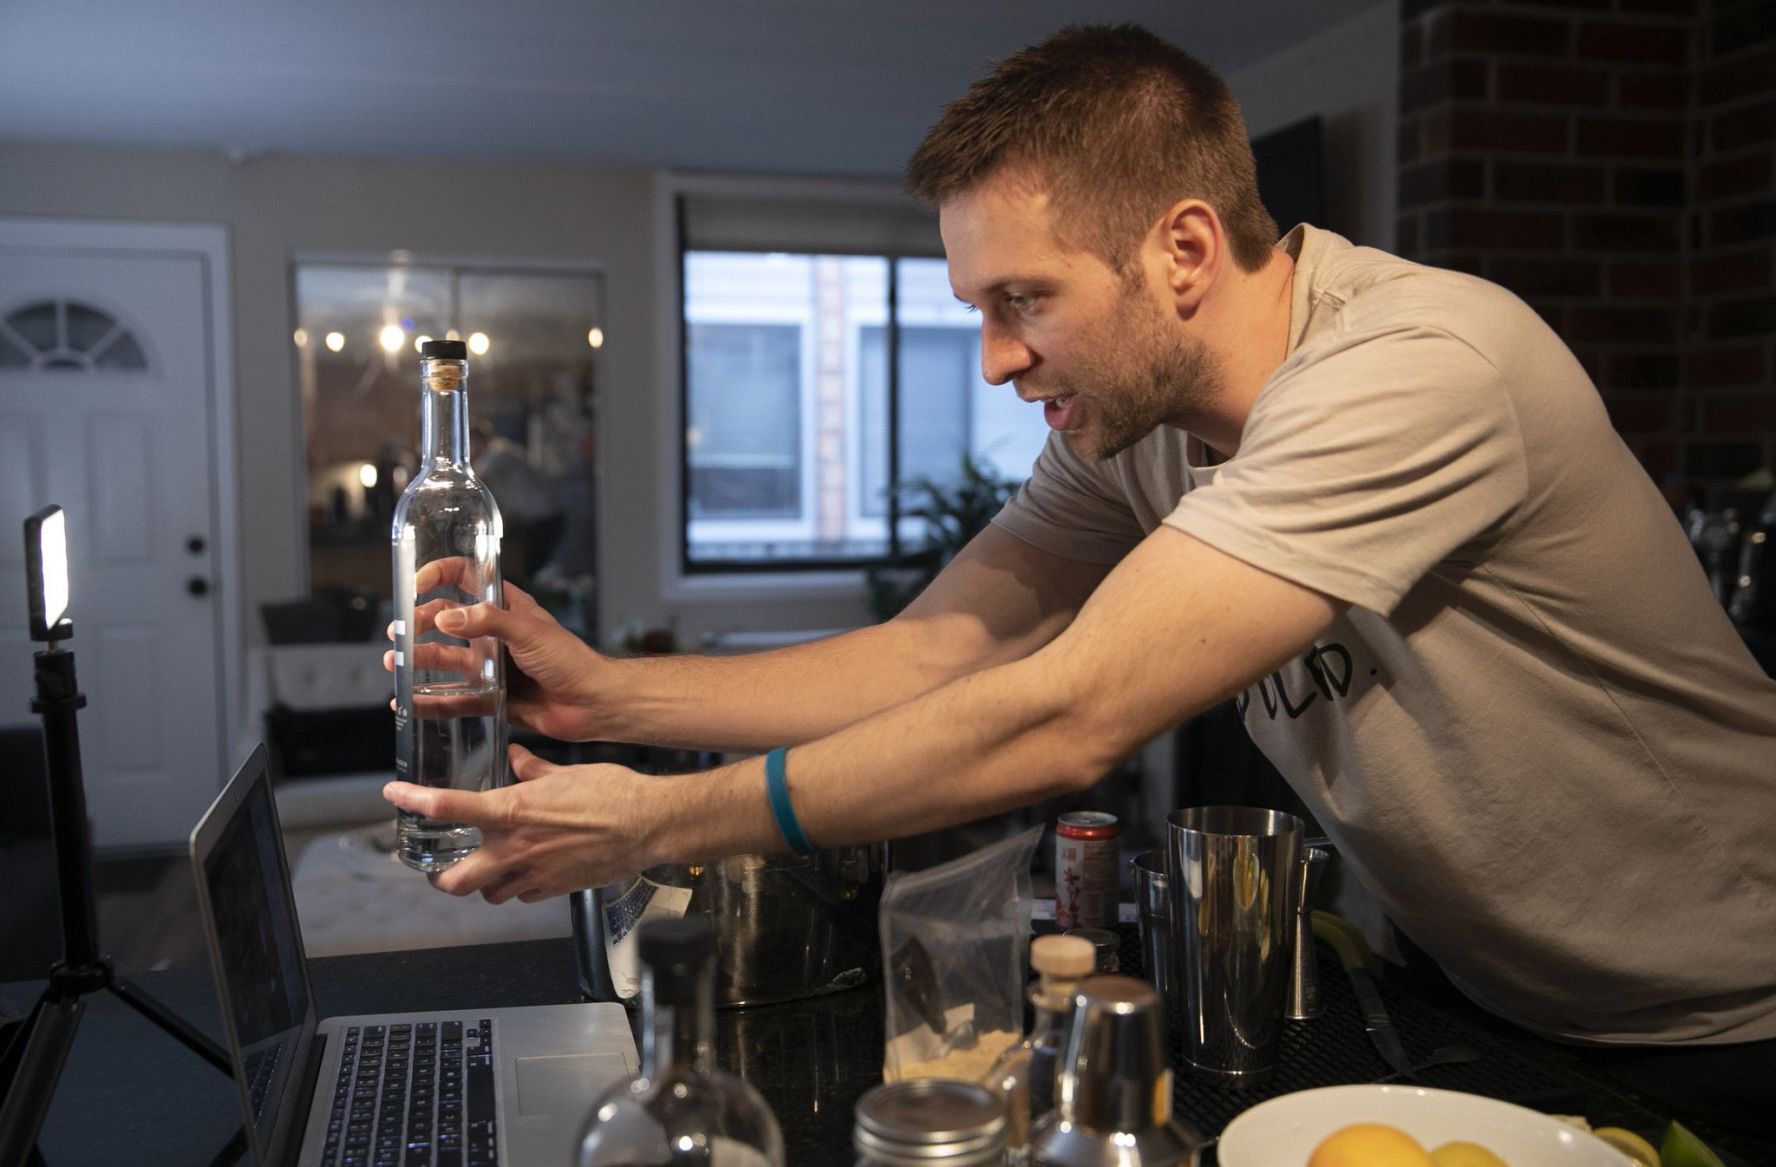 Ross Hunt, owner of unMuddled Bartending Co., brings a bottle of tequila closer to the camera so his class can see during a virtual mixology cocktail class in his apartment. He said that in many ways, the pandemic has allow his business to flourished. PHOTO CREDIT: Tribune News Service